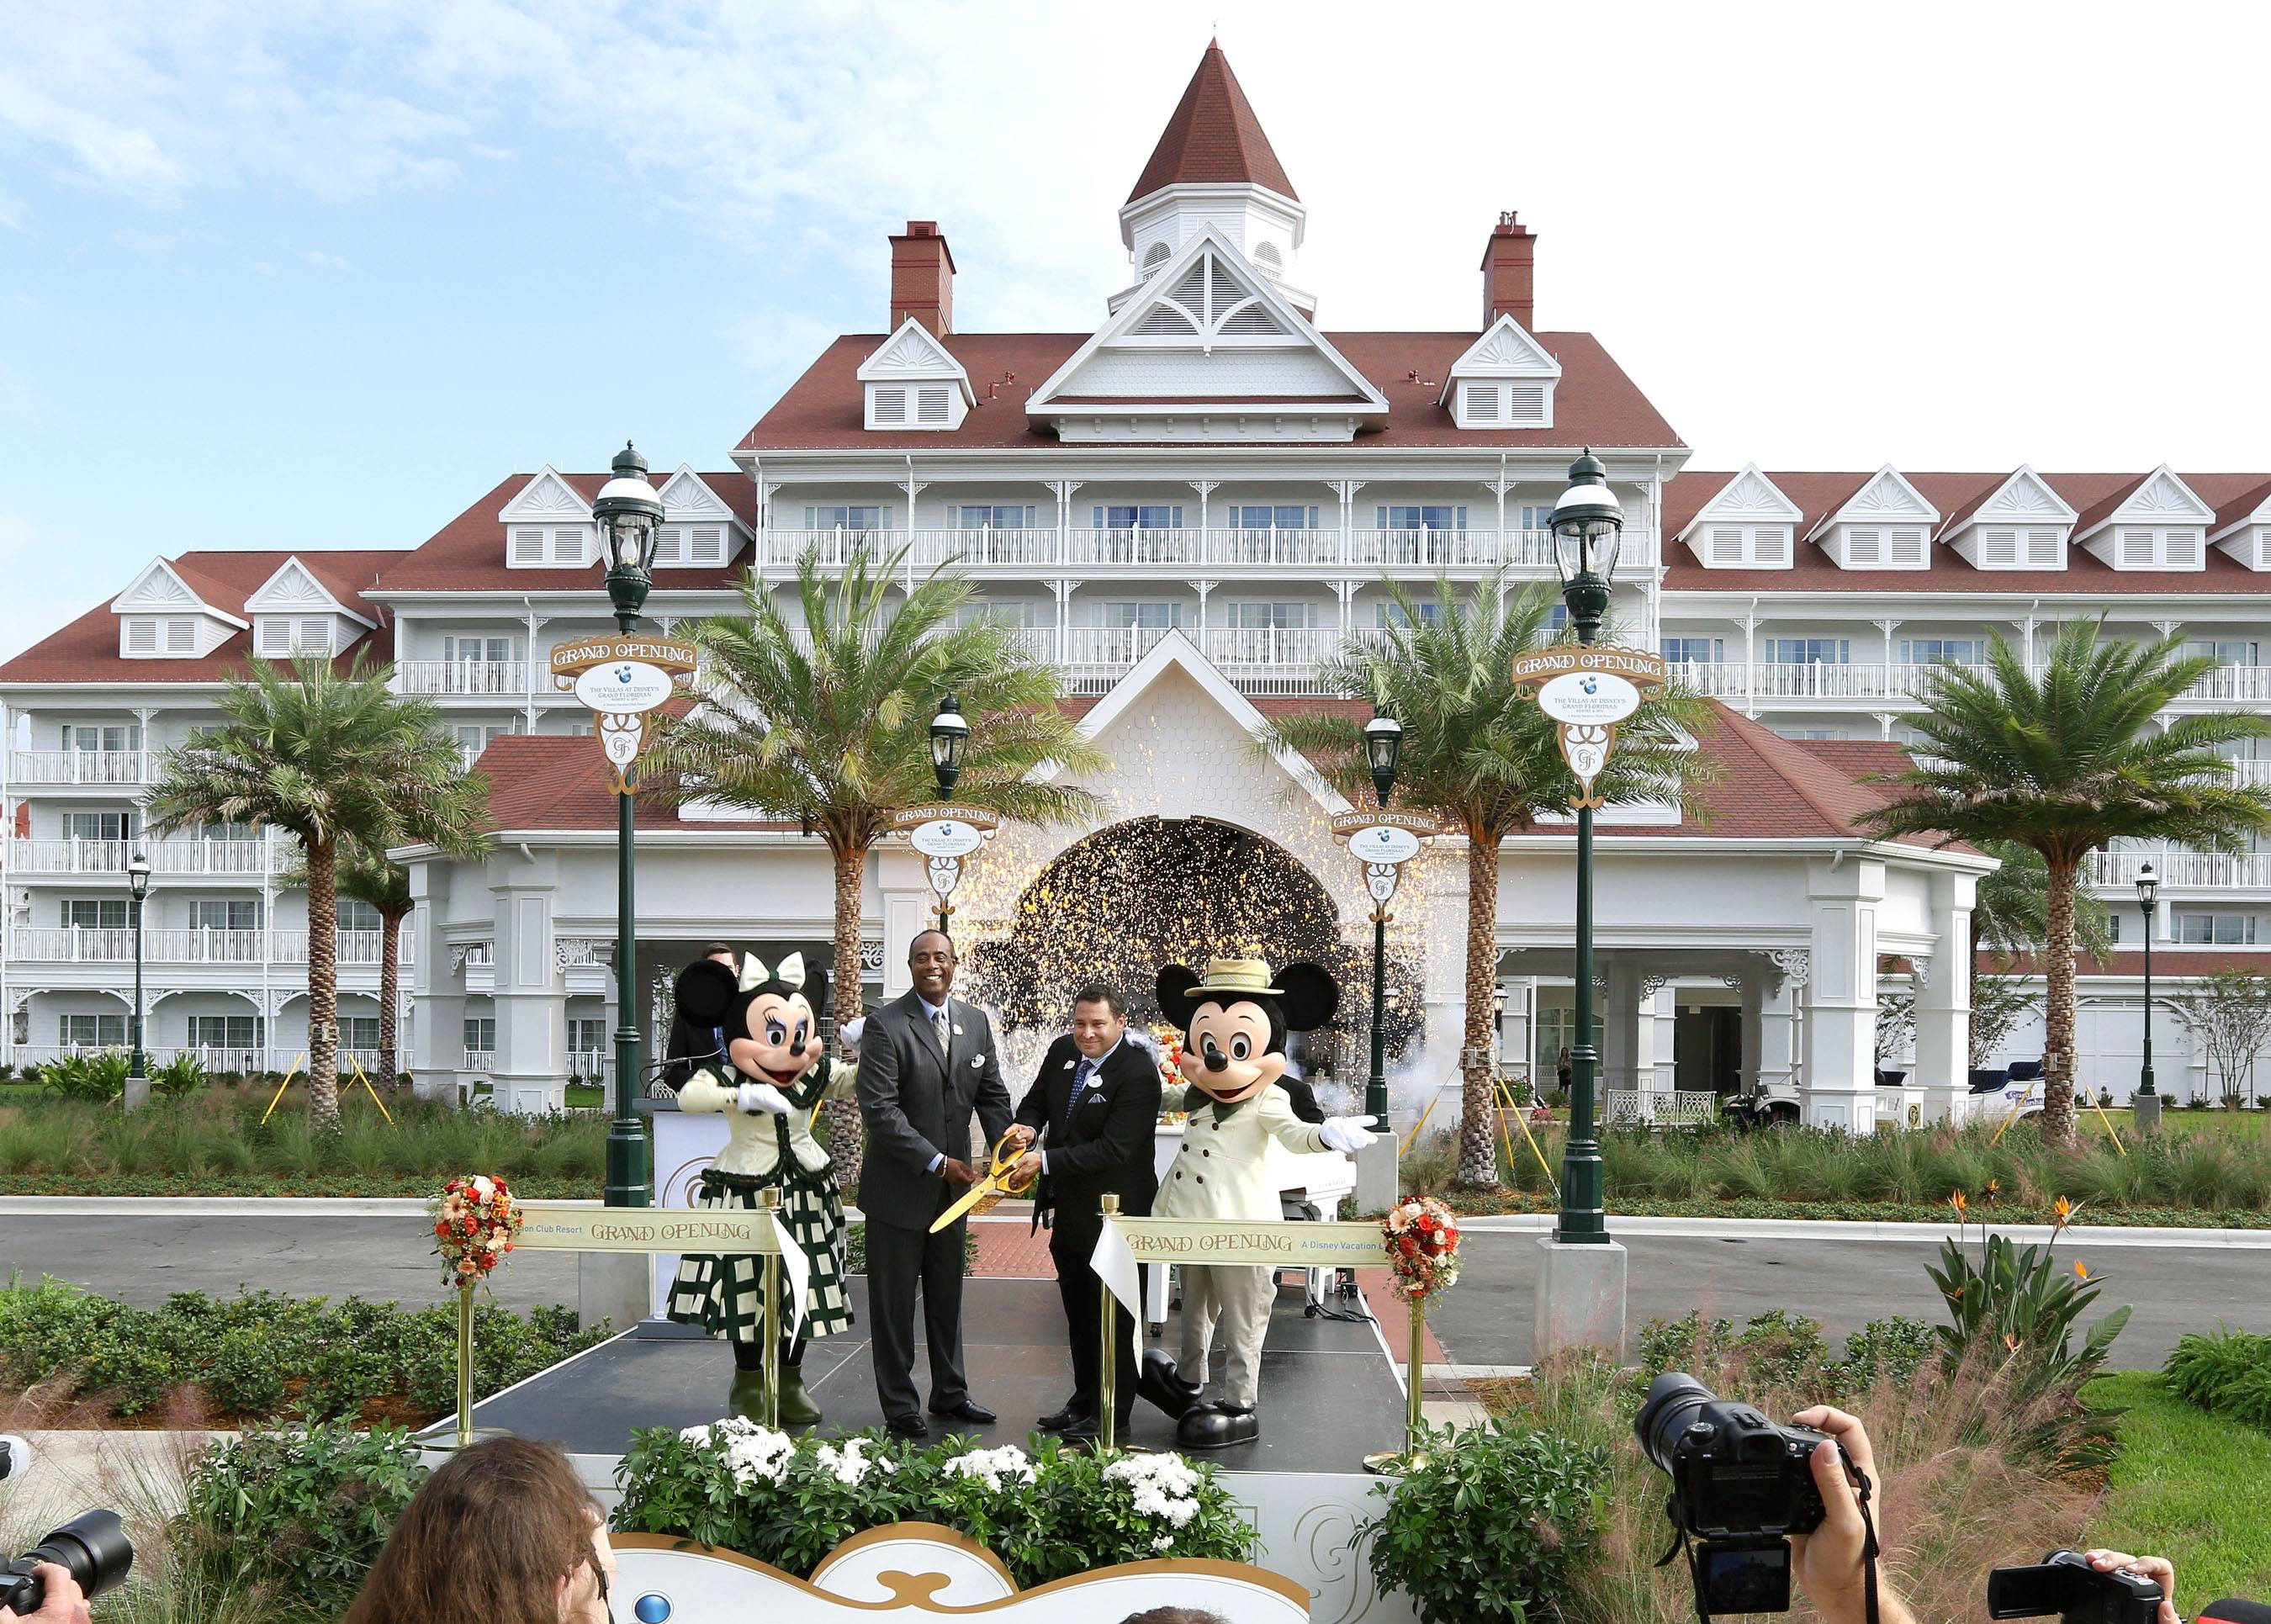 VIDEO - See 2 years of Grand Floridian DVC Villas construction in 60 seconds